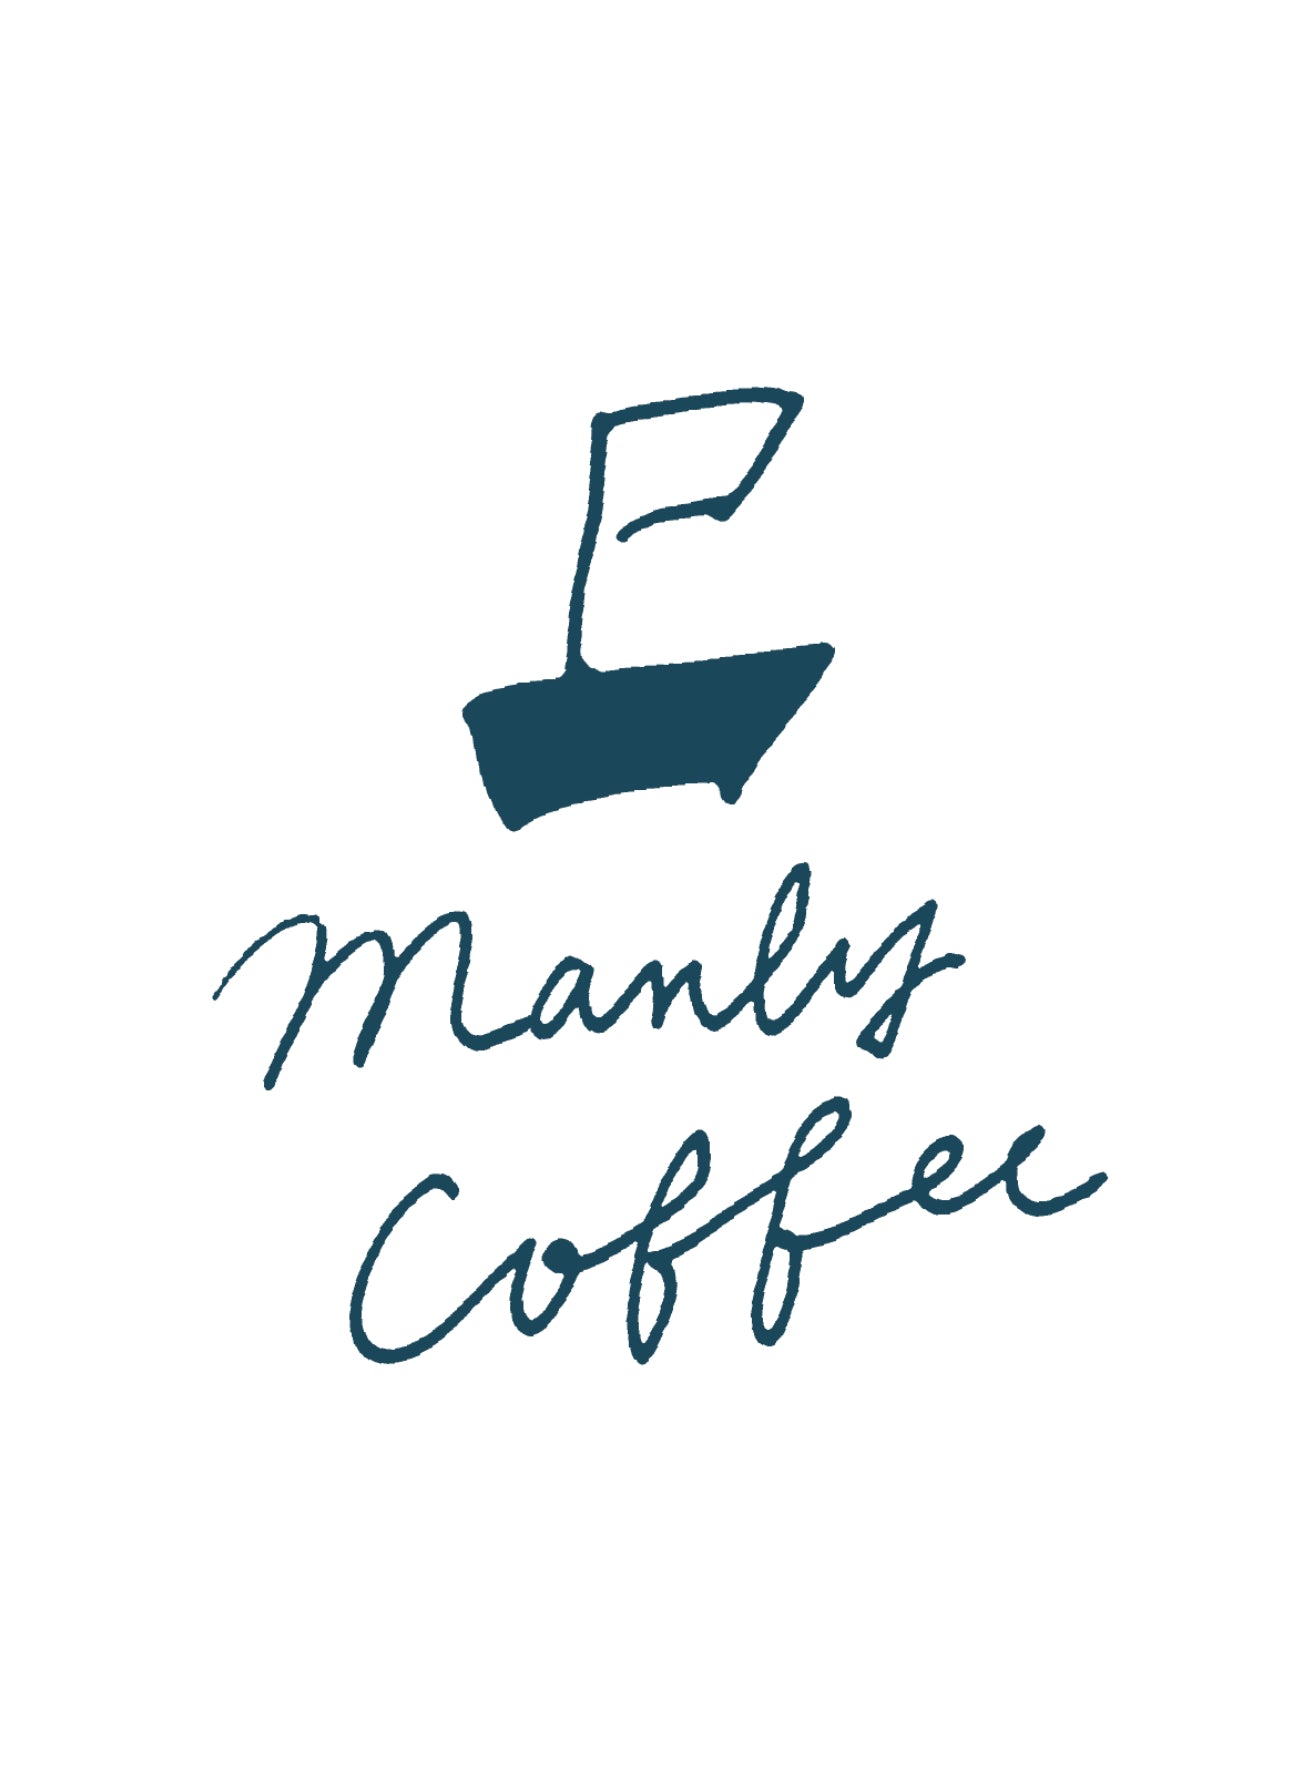 Manly Coffee